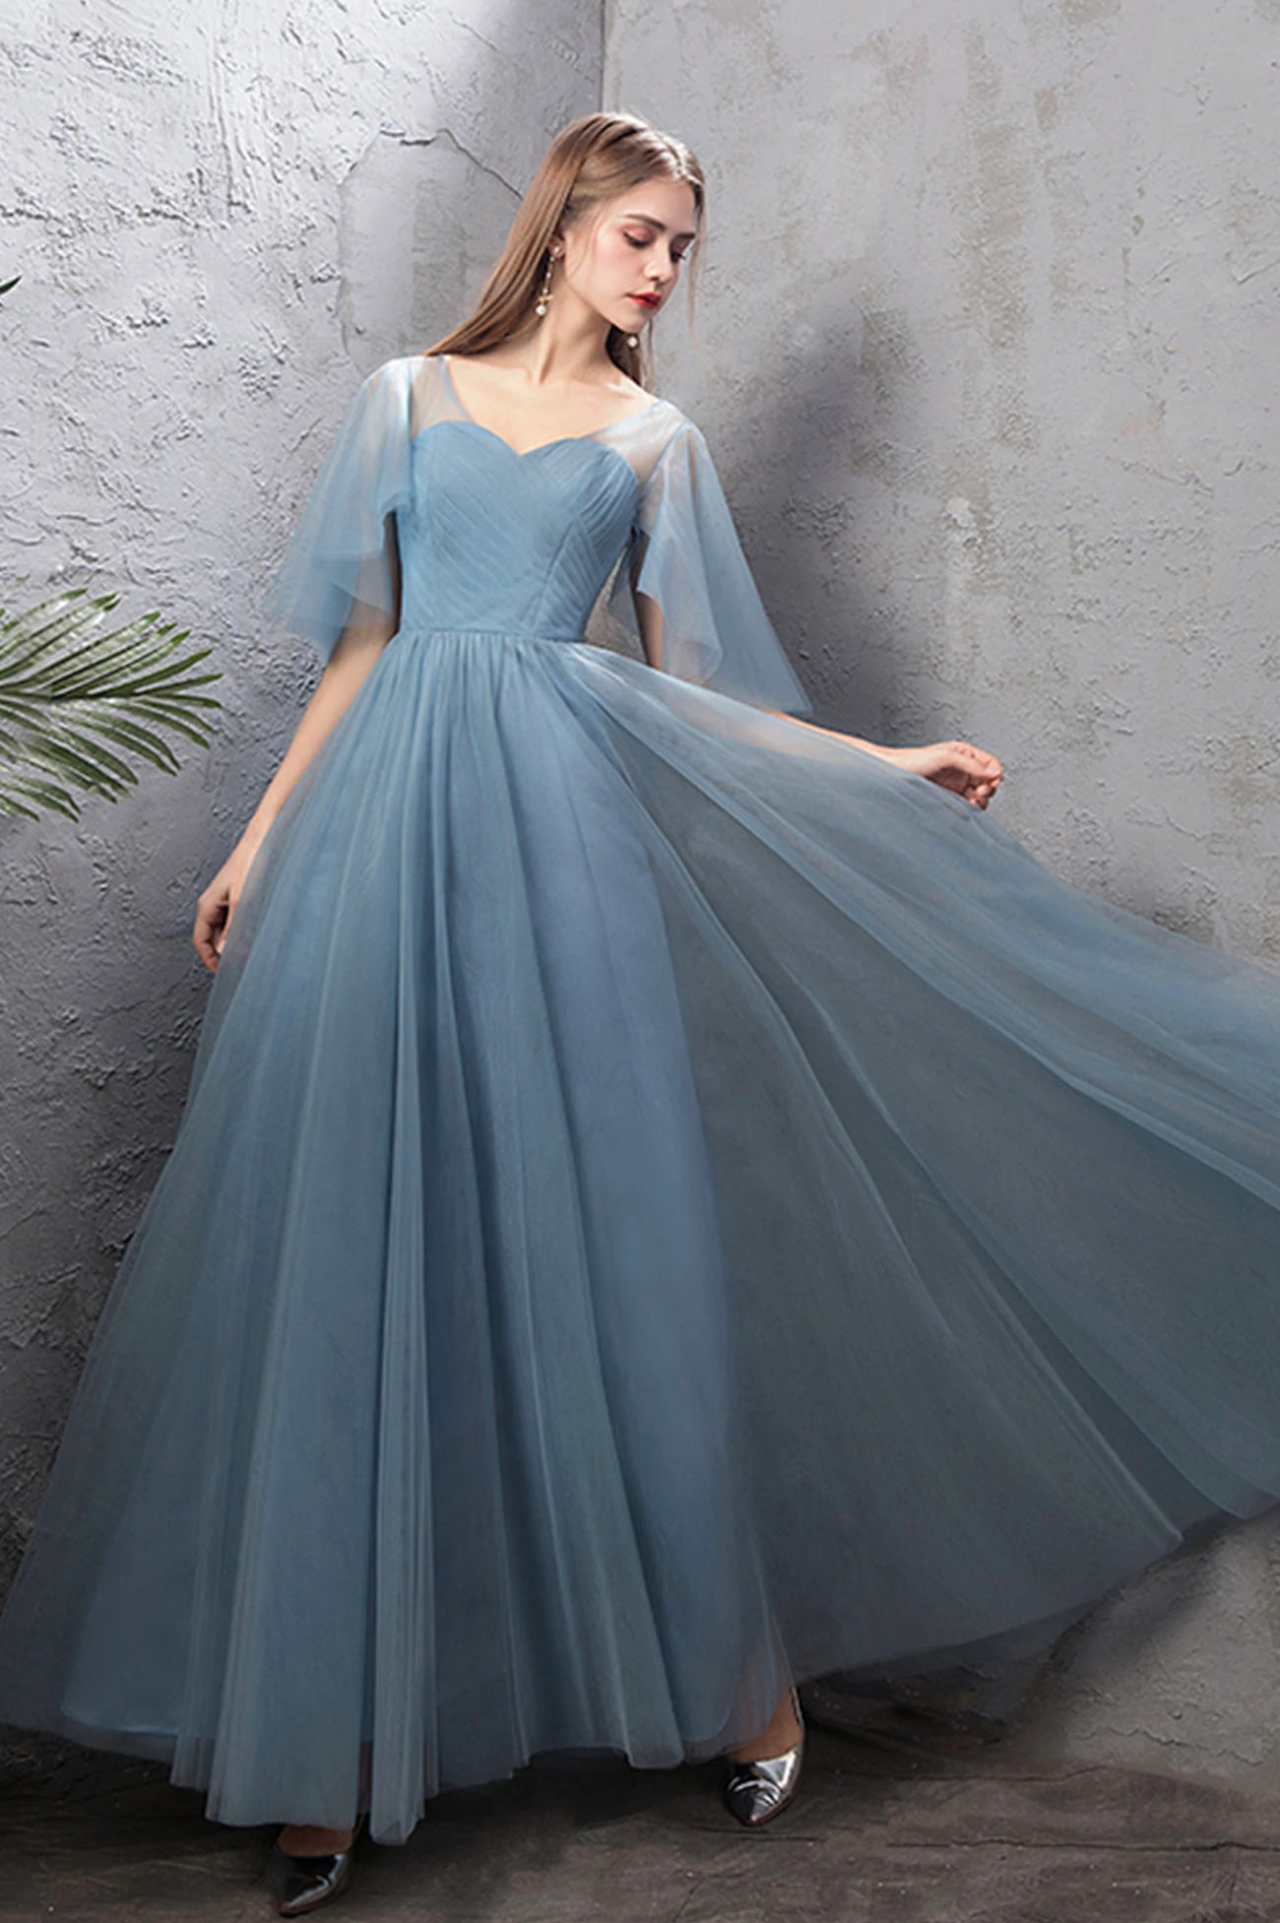 Lovely Light Blue Tulle Long A-line Party Dress Formal Dress, Blue Evening Gown Bridesmaid Dresses